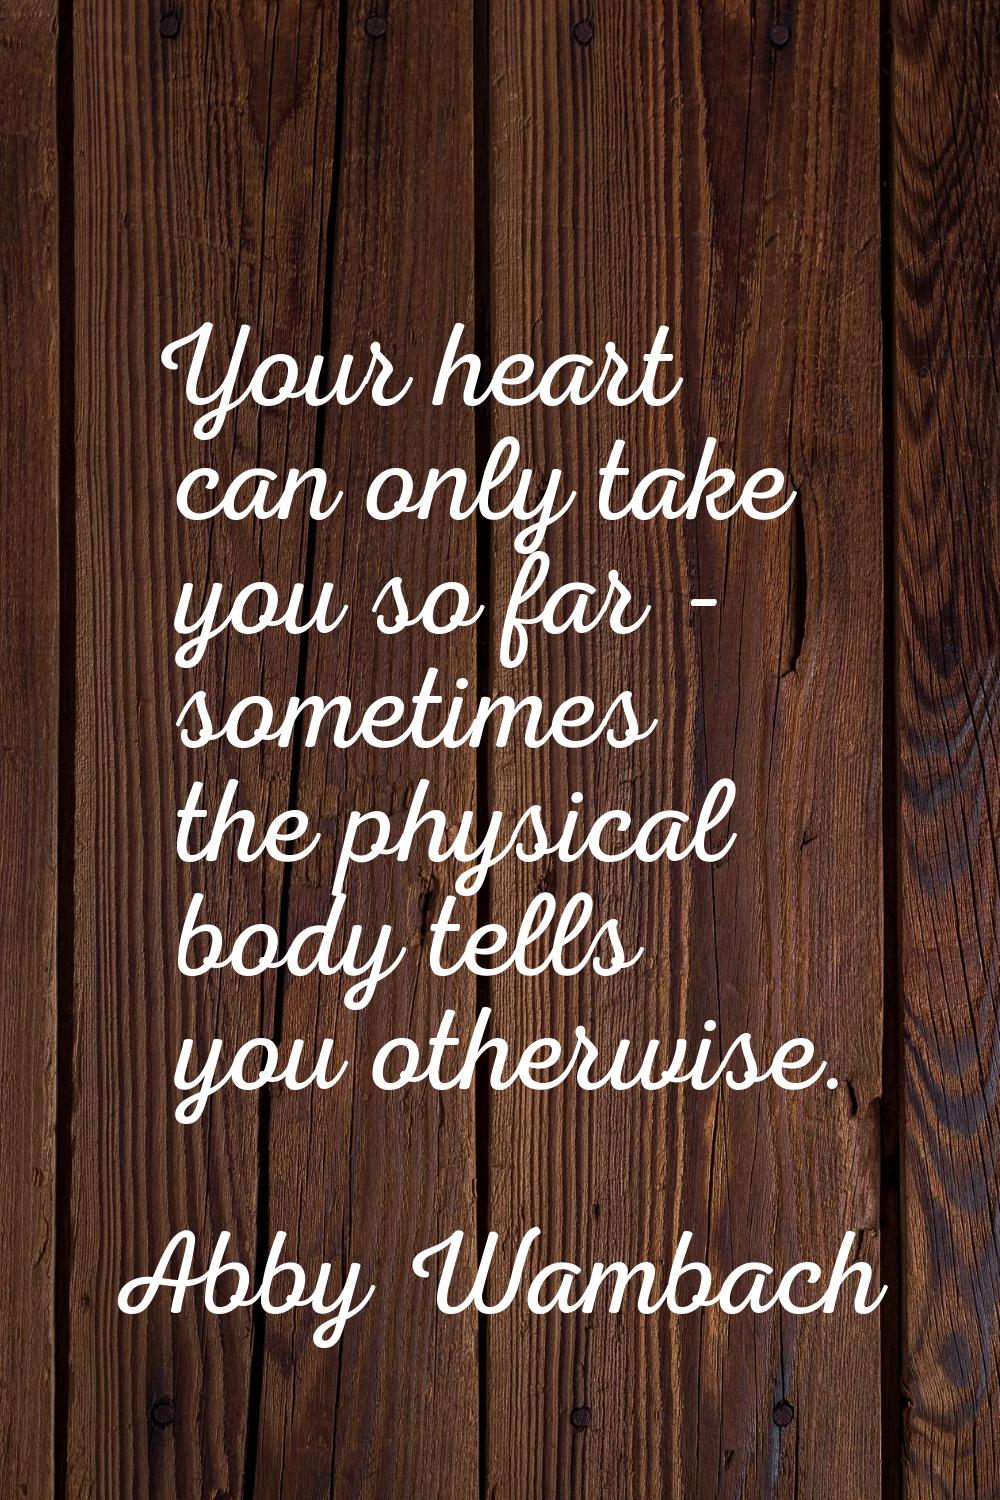 Your heart can only take you so far - sometimes the physical body tells you otherwise.